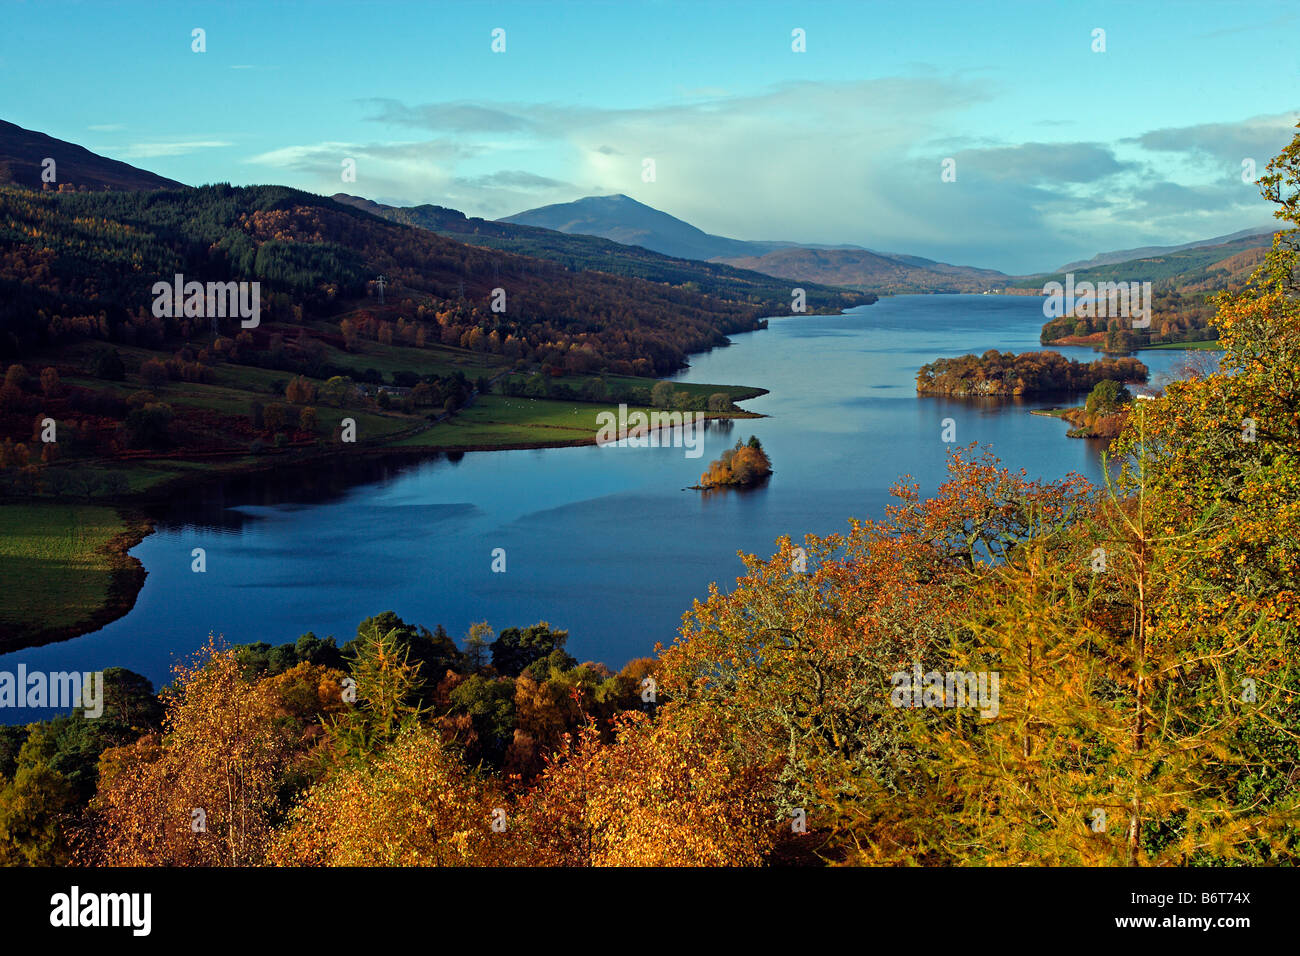 Queen s View Loch Tummel Tayside close to Pitlochry Perth Kinross Scotland UK Stock Photo